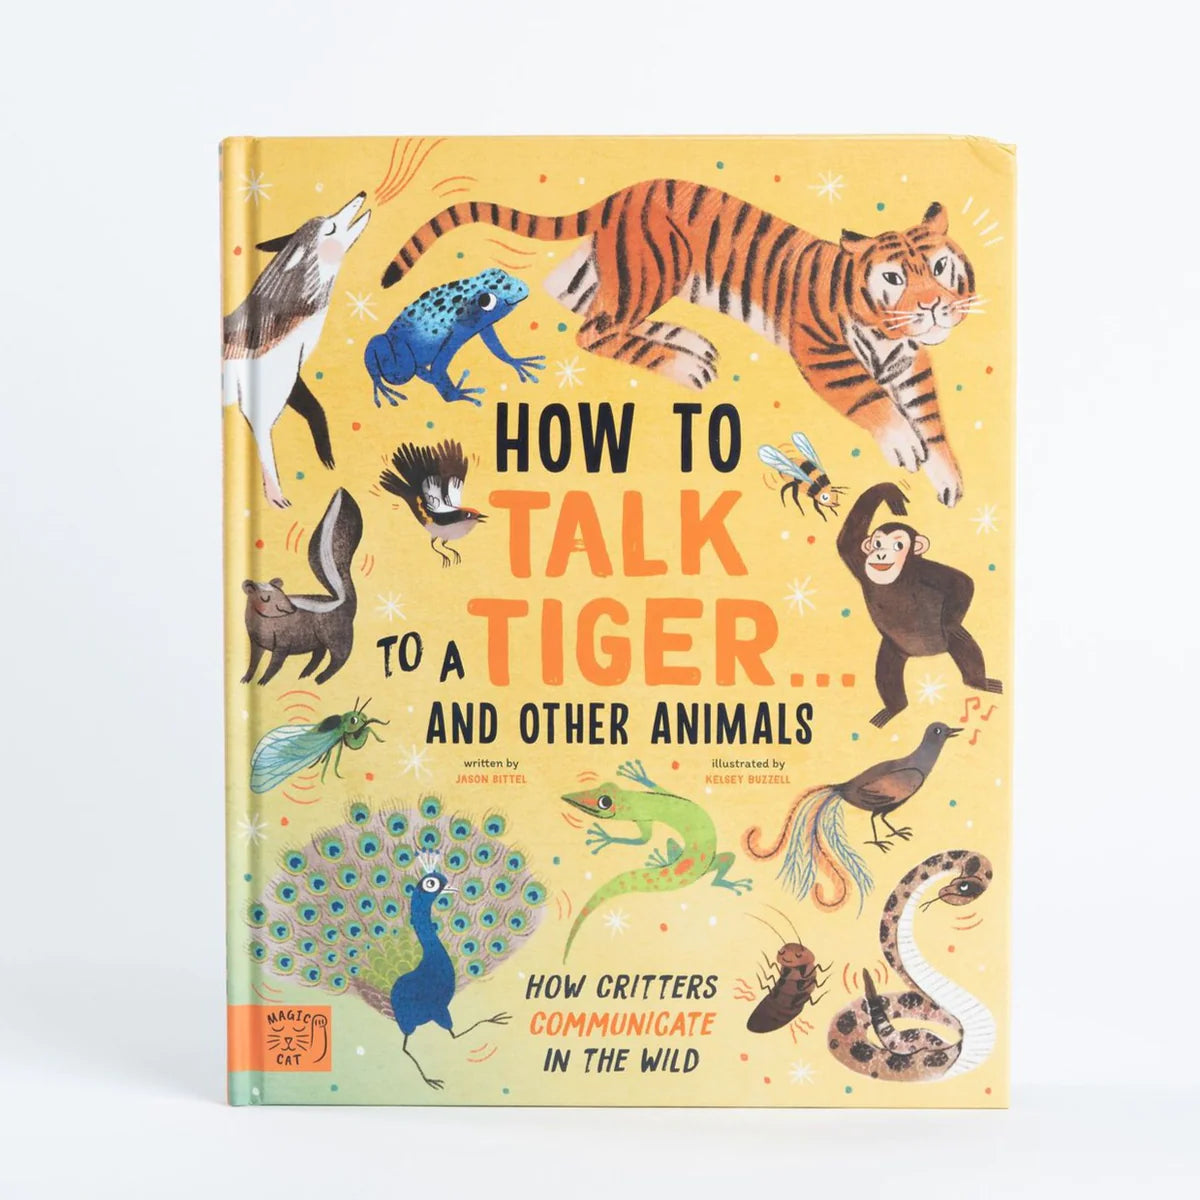 How to Talk to a Tiger & other Animals